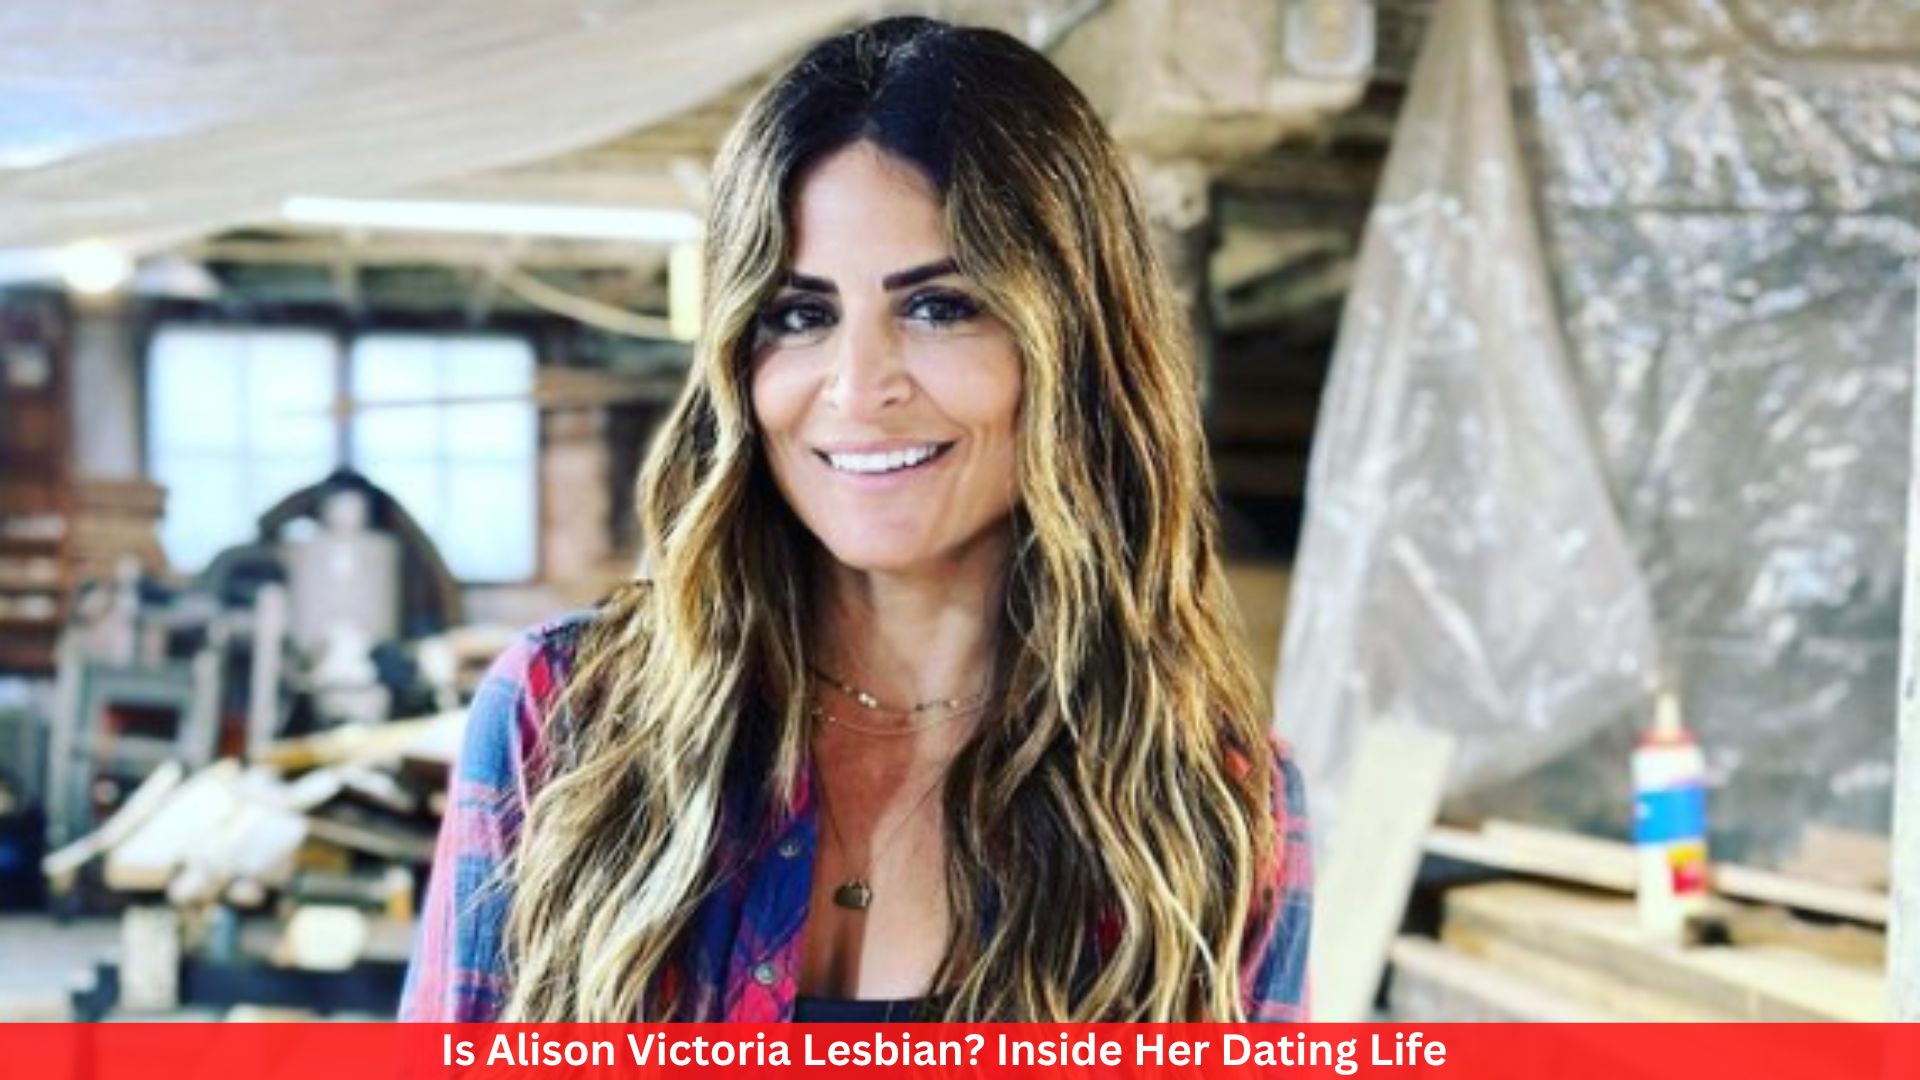 Is Alison Victoria Lesbian? Inside Her Dating Life